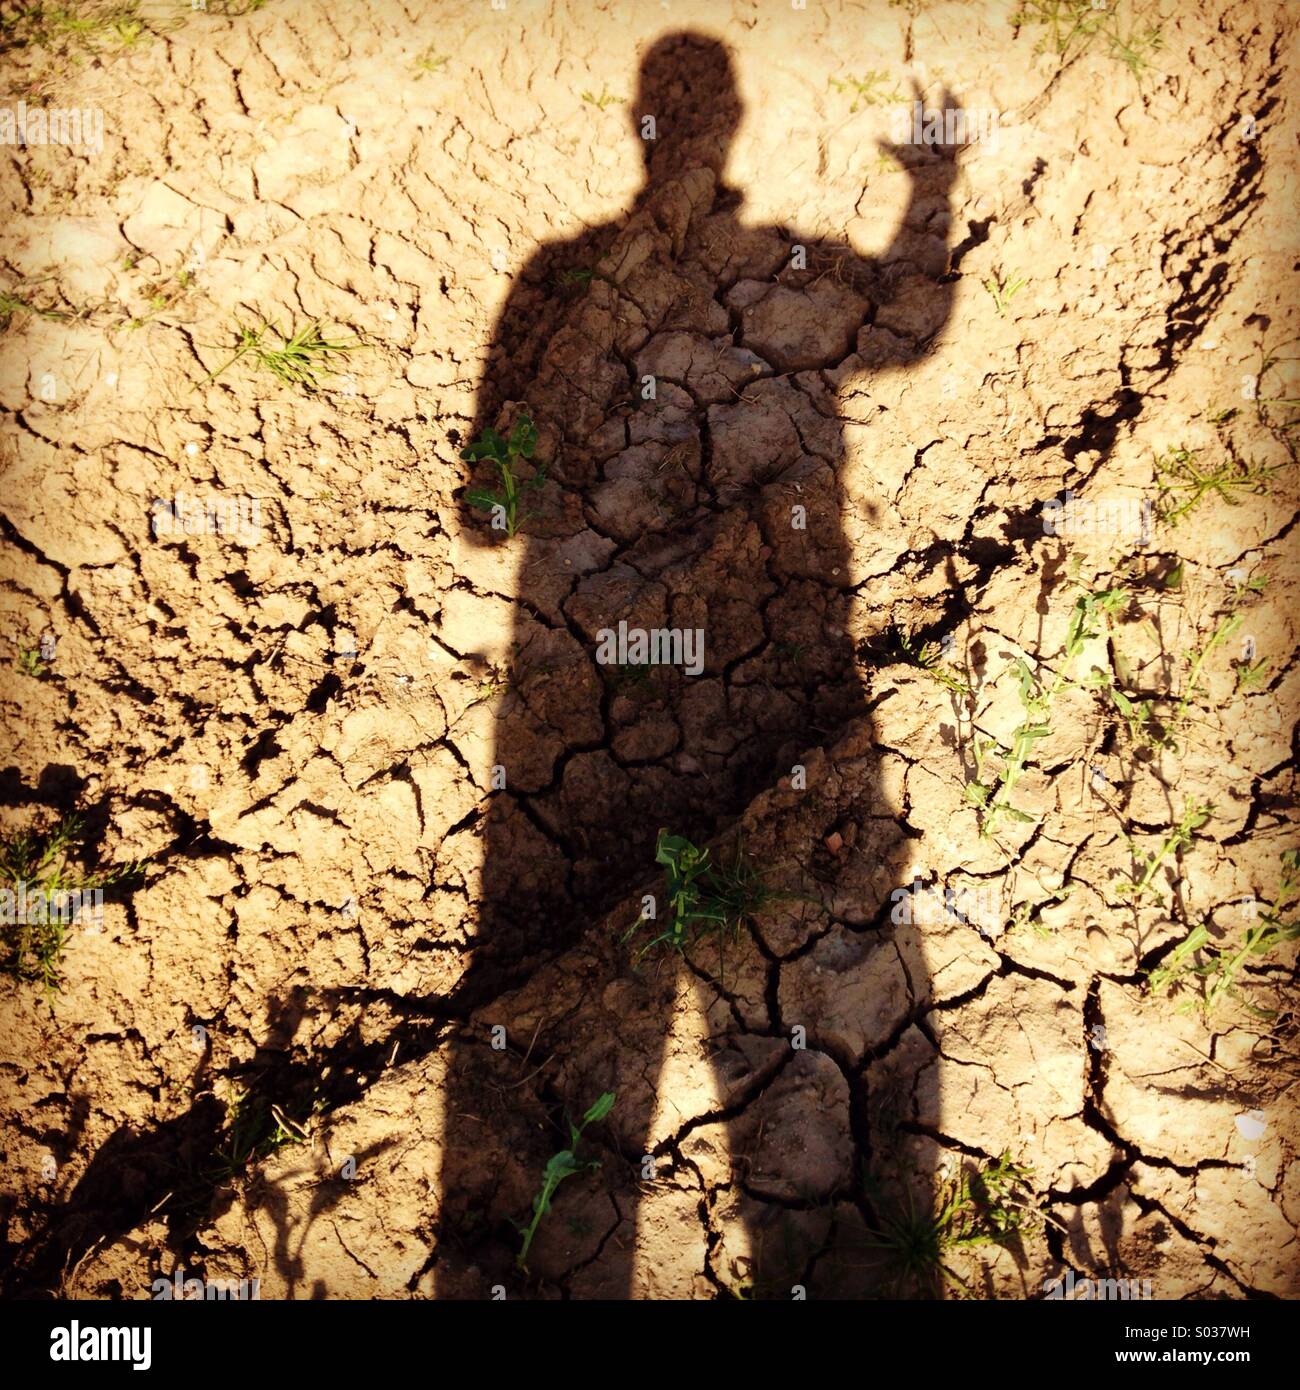 Silhouette of a Human Being on parched earth. Stock Photo